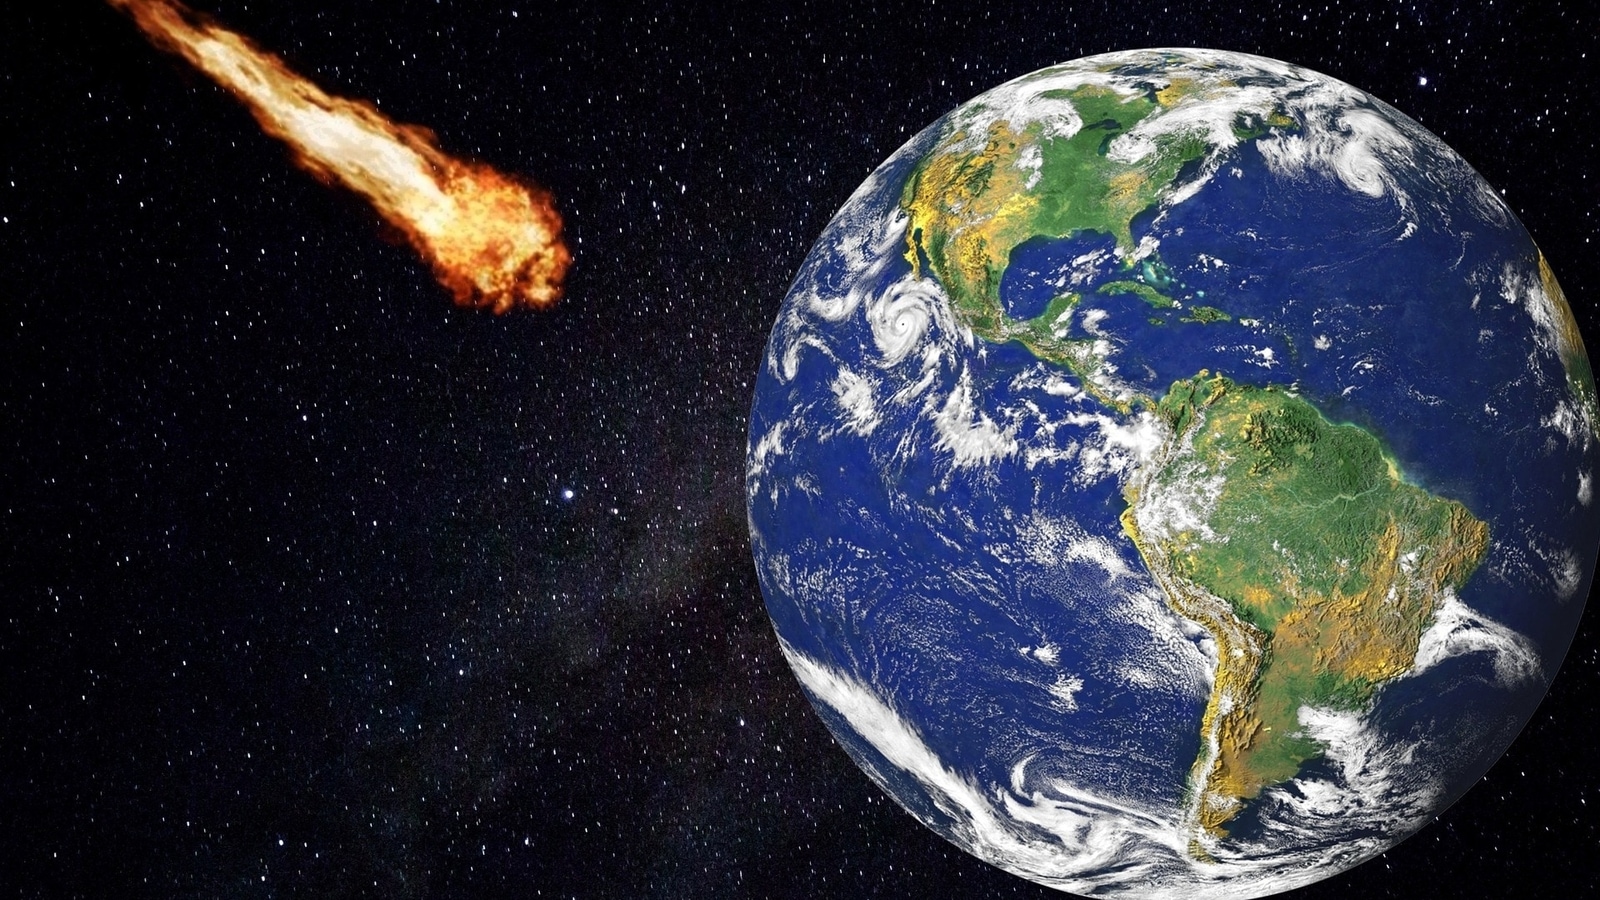 NASA says a humongous building-sized asteroid heading for Earth today | Tech News